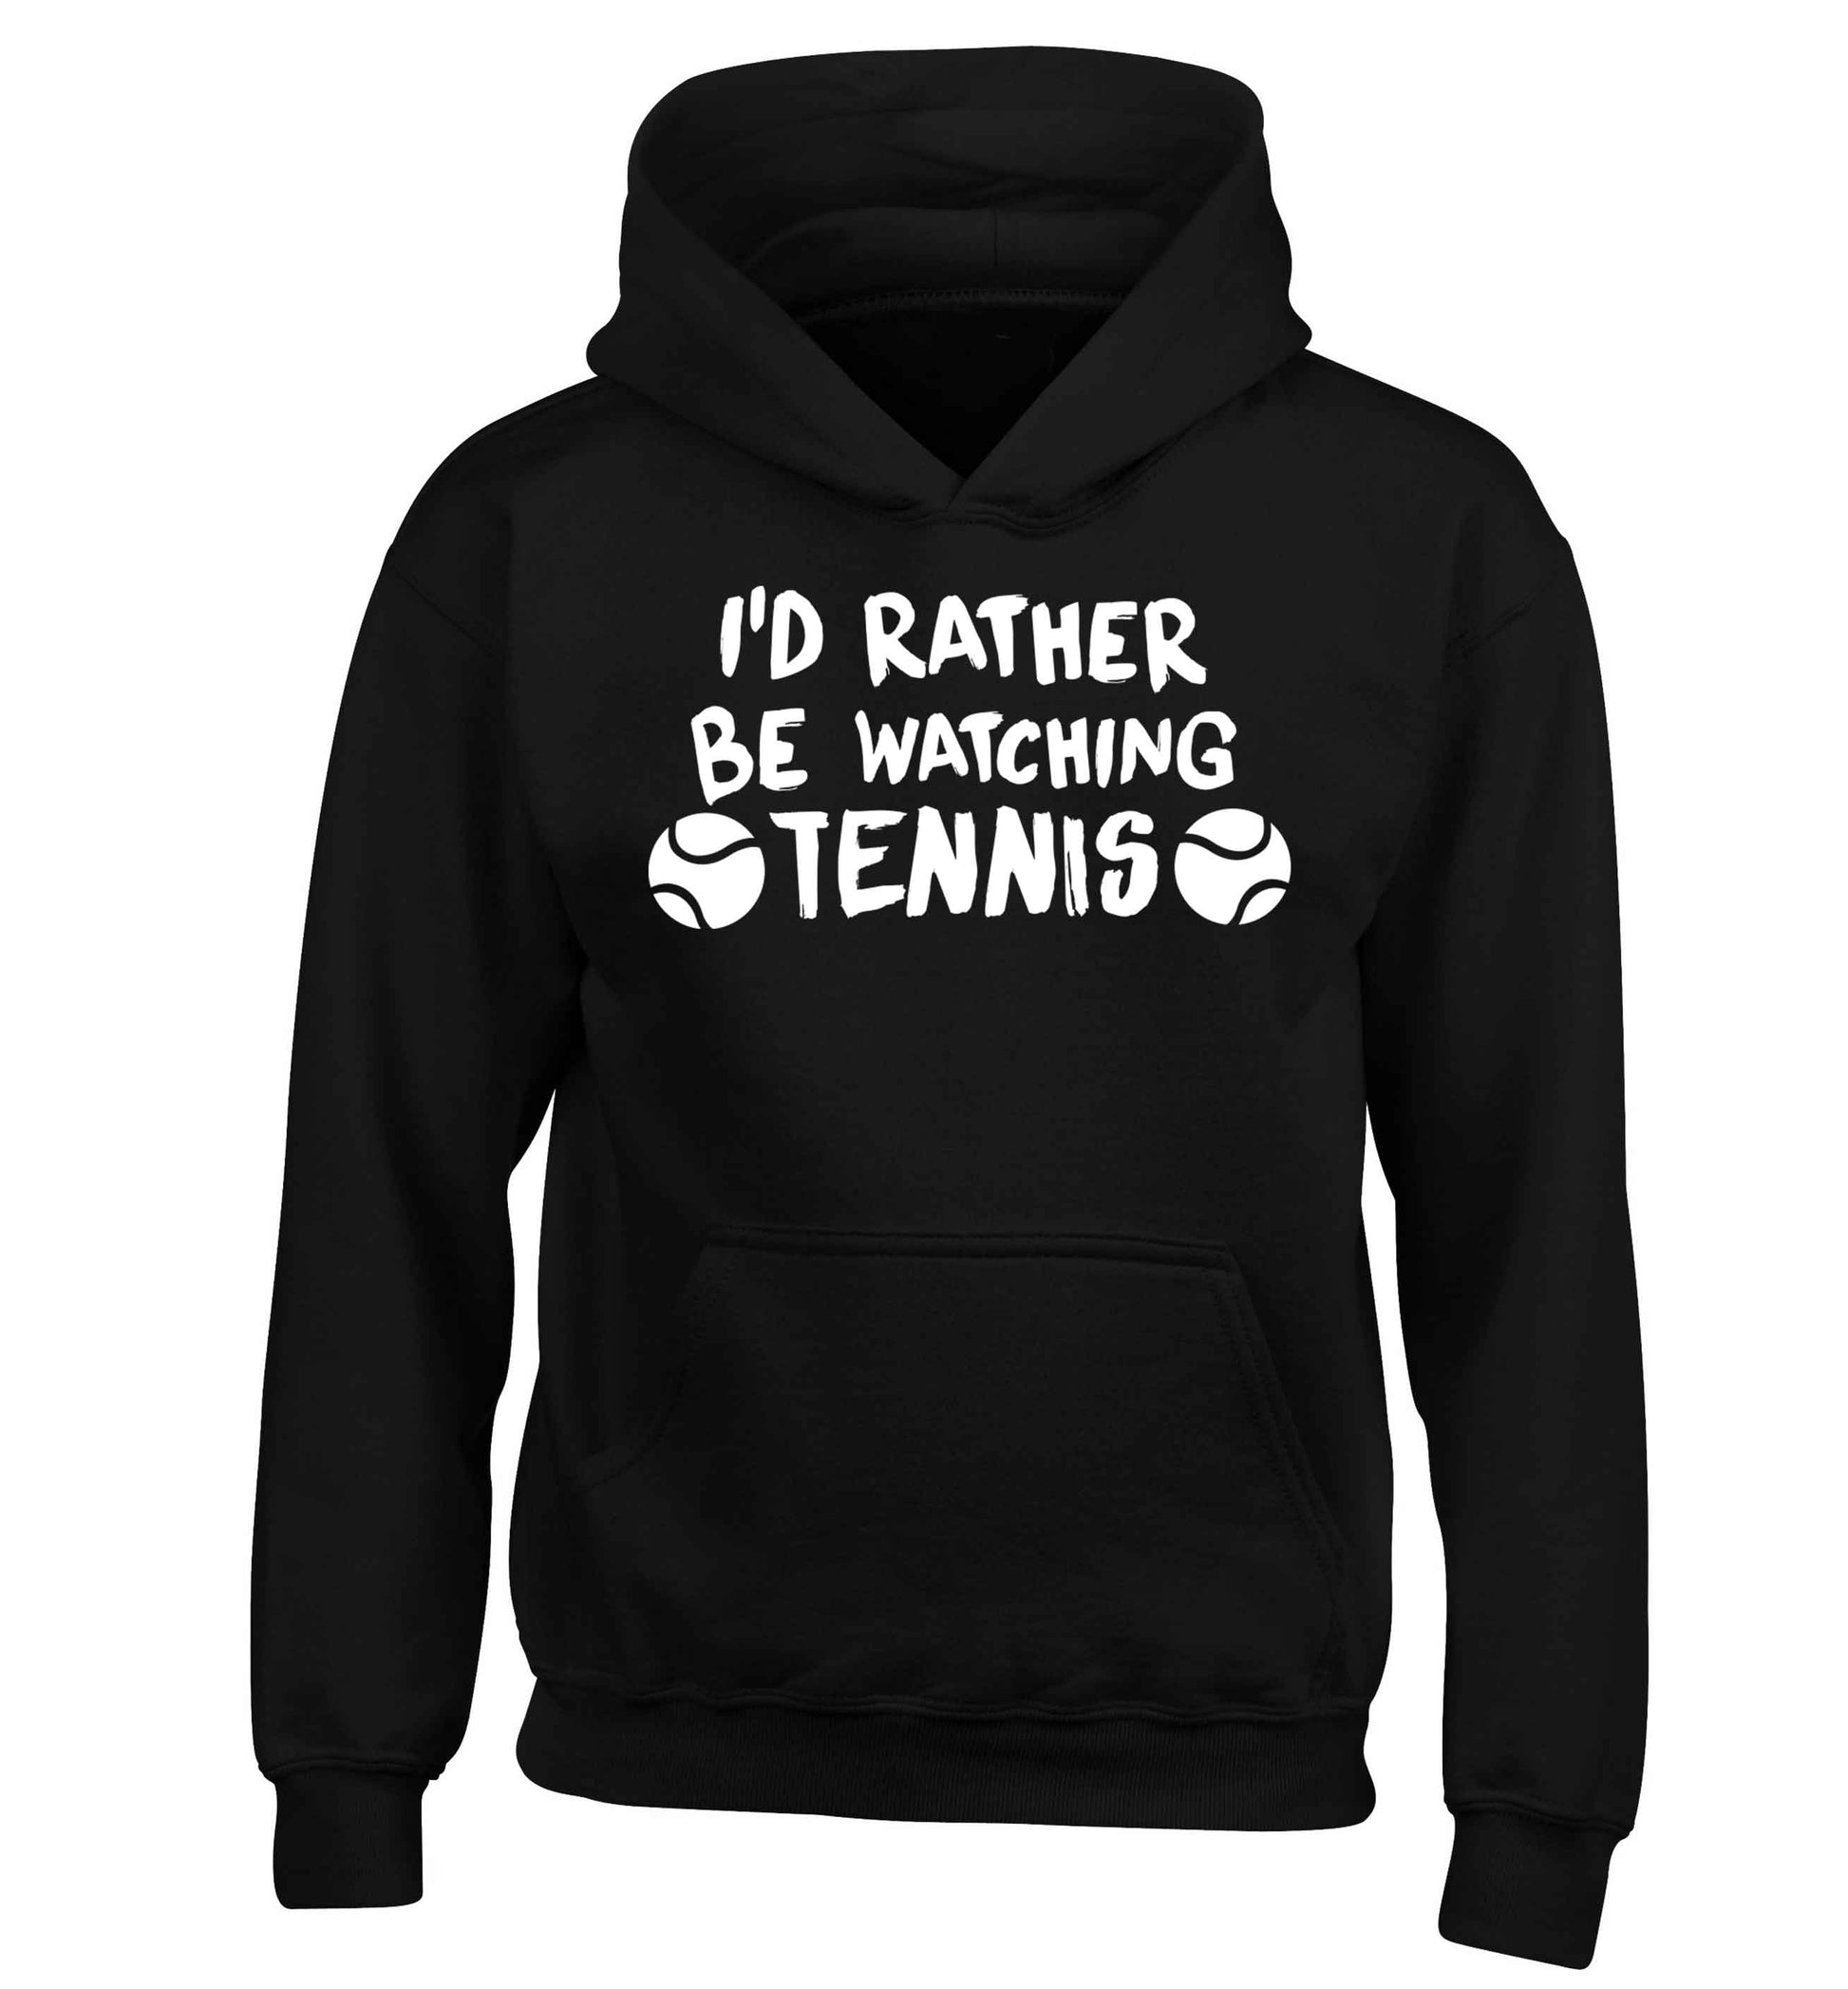 I'd rather be watching the tennis children's black hoodie 12-13 Years